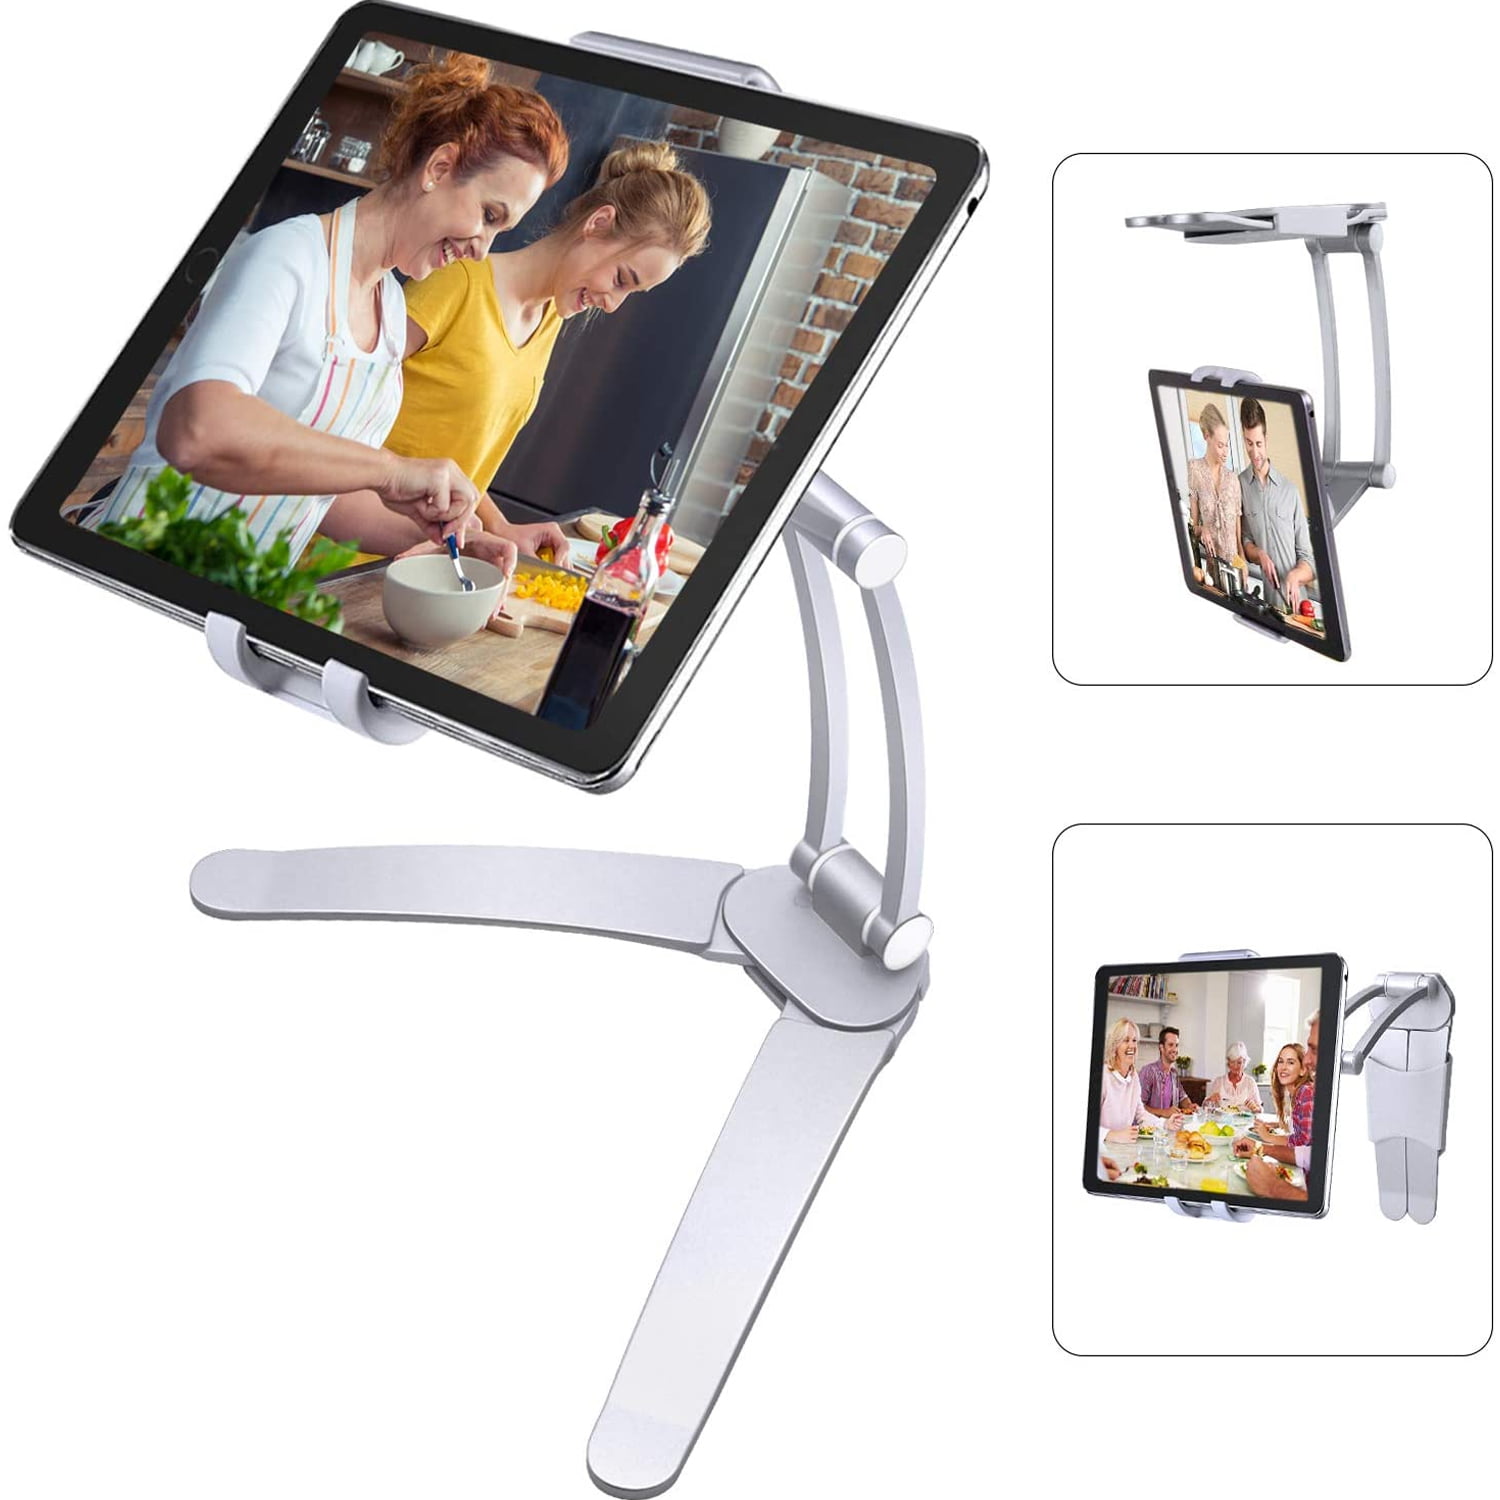 2 Adjustable Tablet Mount for Cabinets Counter Tops Walls fits iPad 9.7 6th Gen 